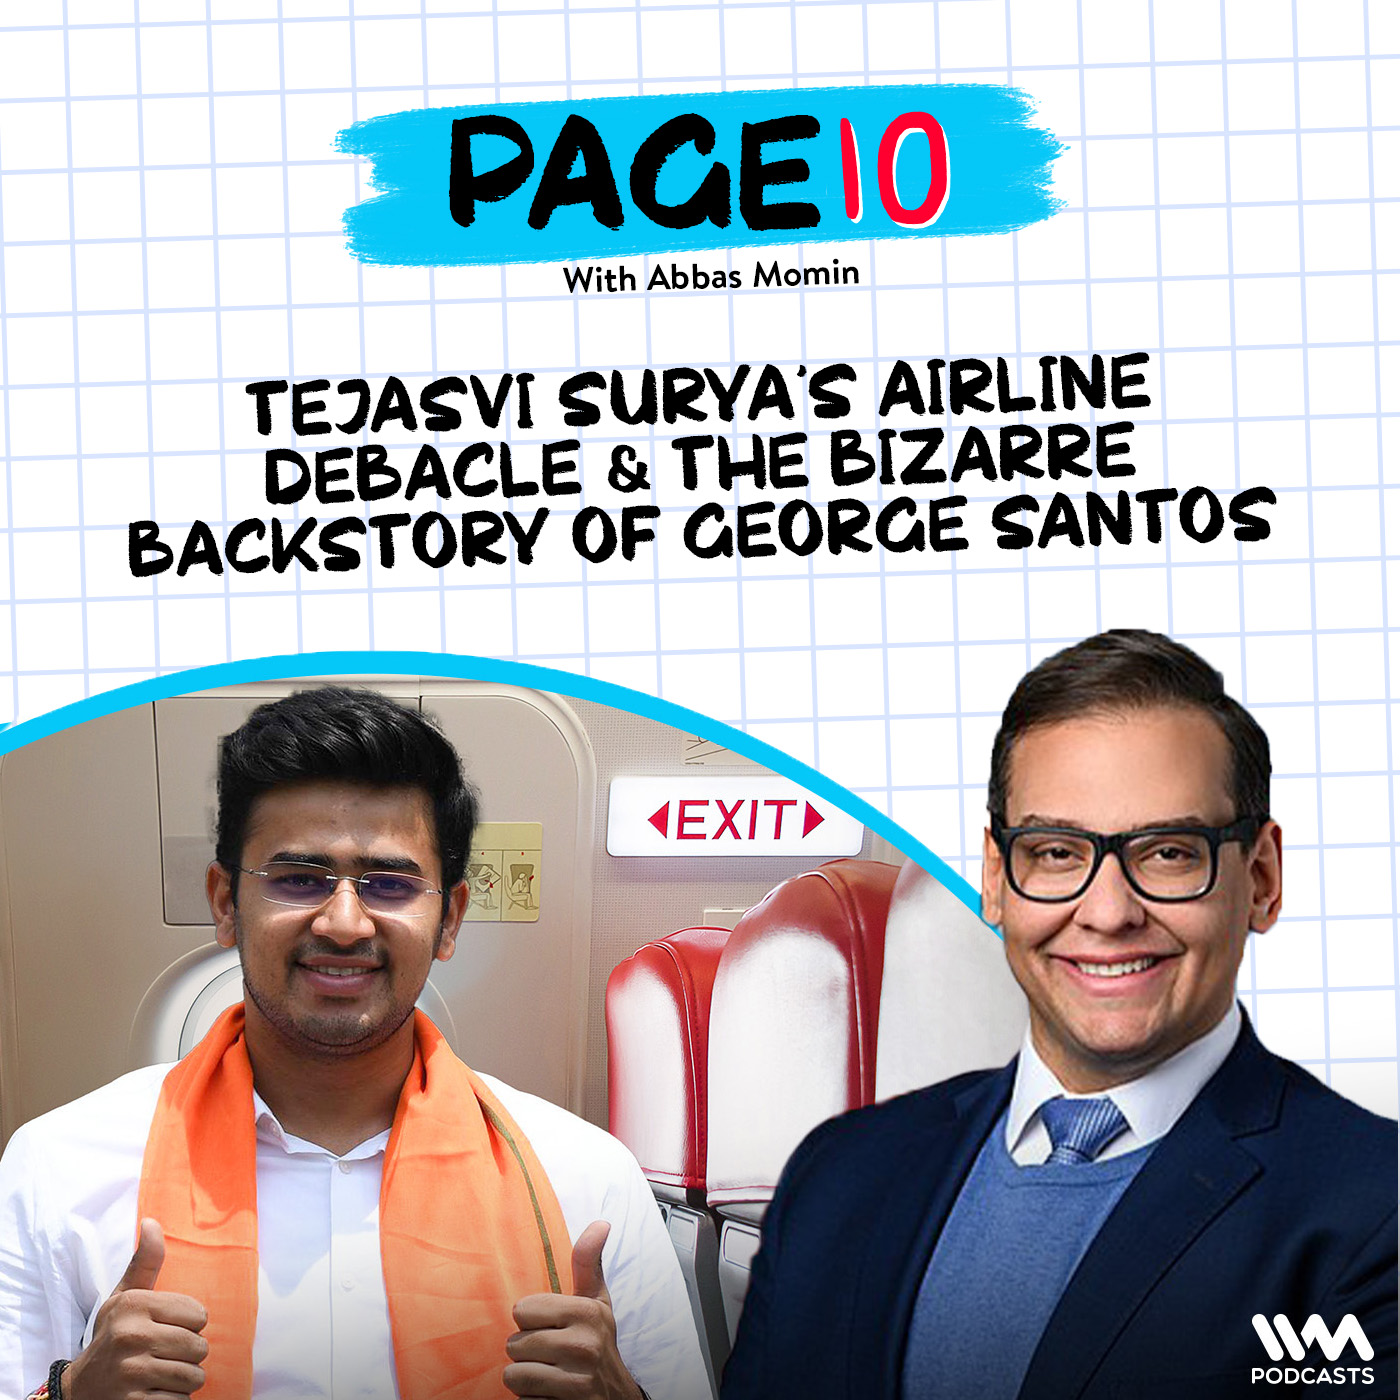 Page 10 : Episode 10 : Hateful News anchors, Tejasvi Surya's Airline Debacle & The Bizarre Backstory of George Santos